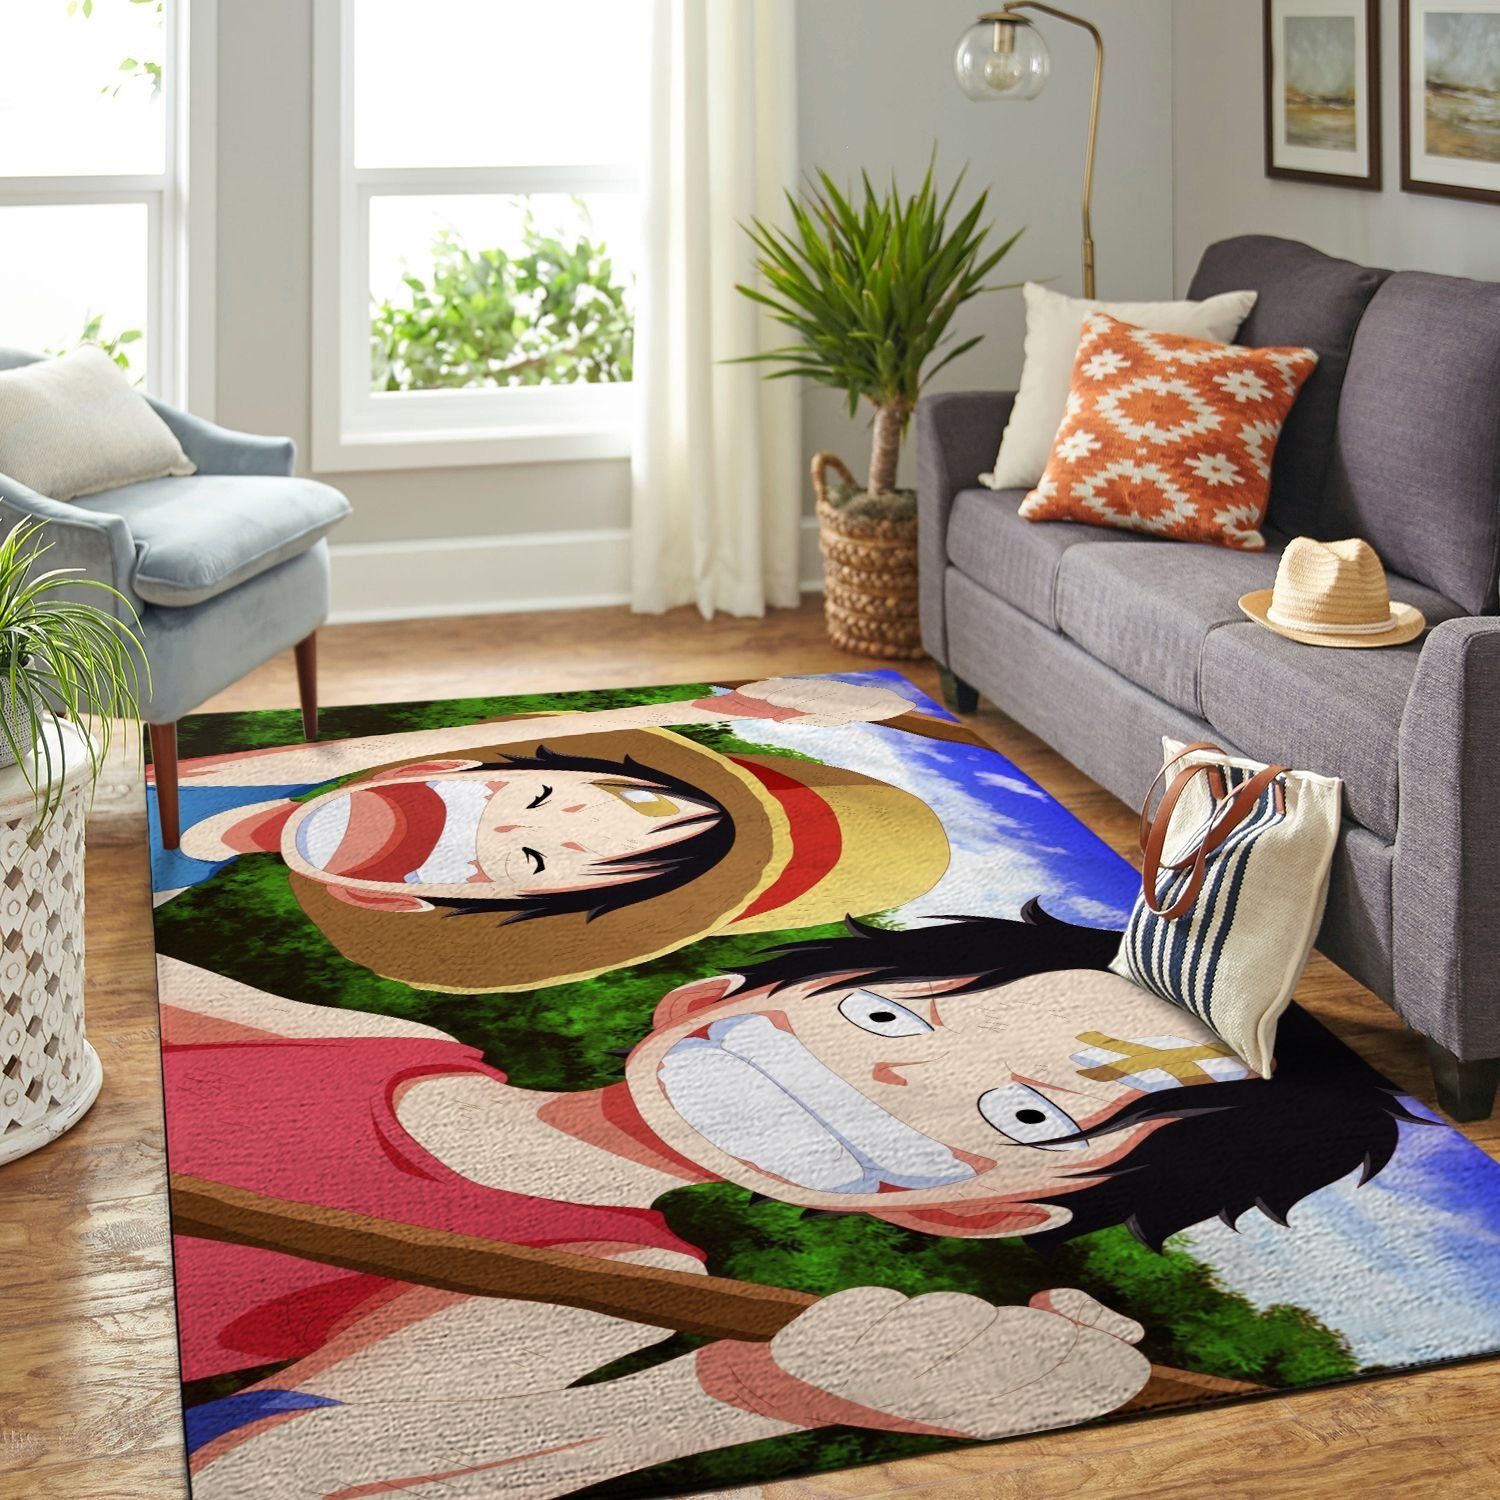 Amazon Onepiece-luffy Living Room Area No6440 Rug